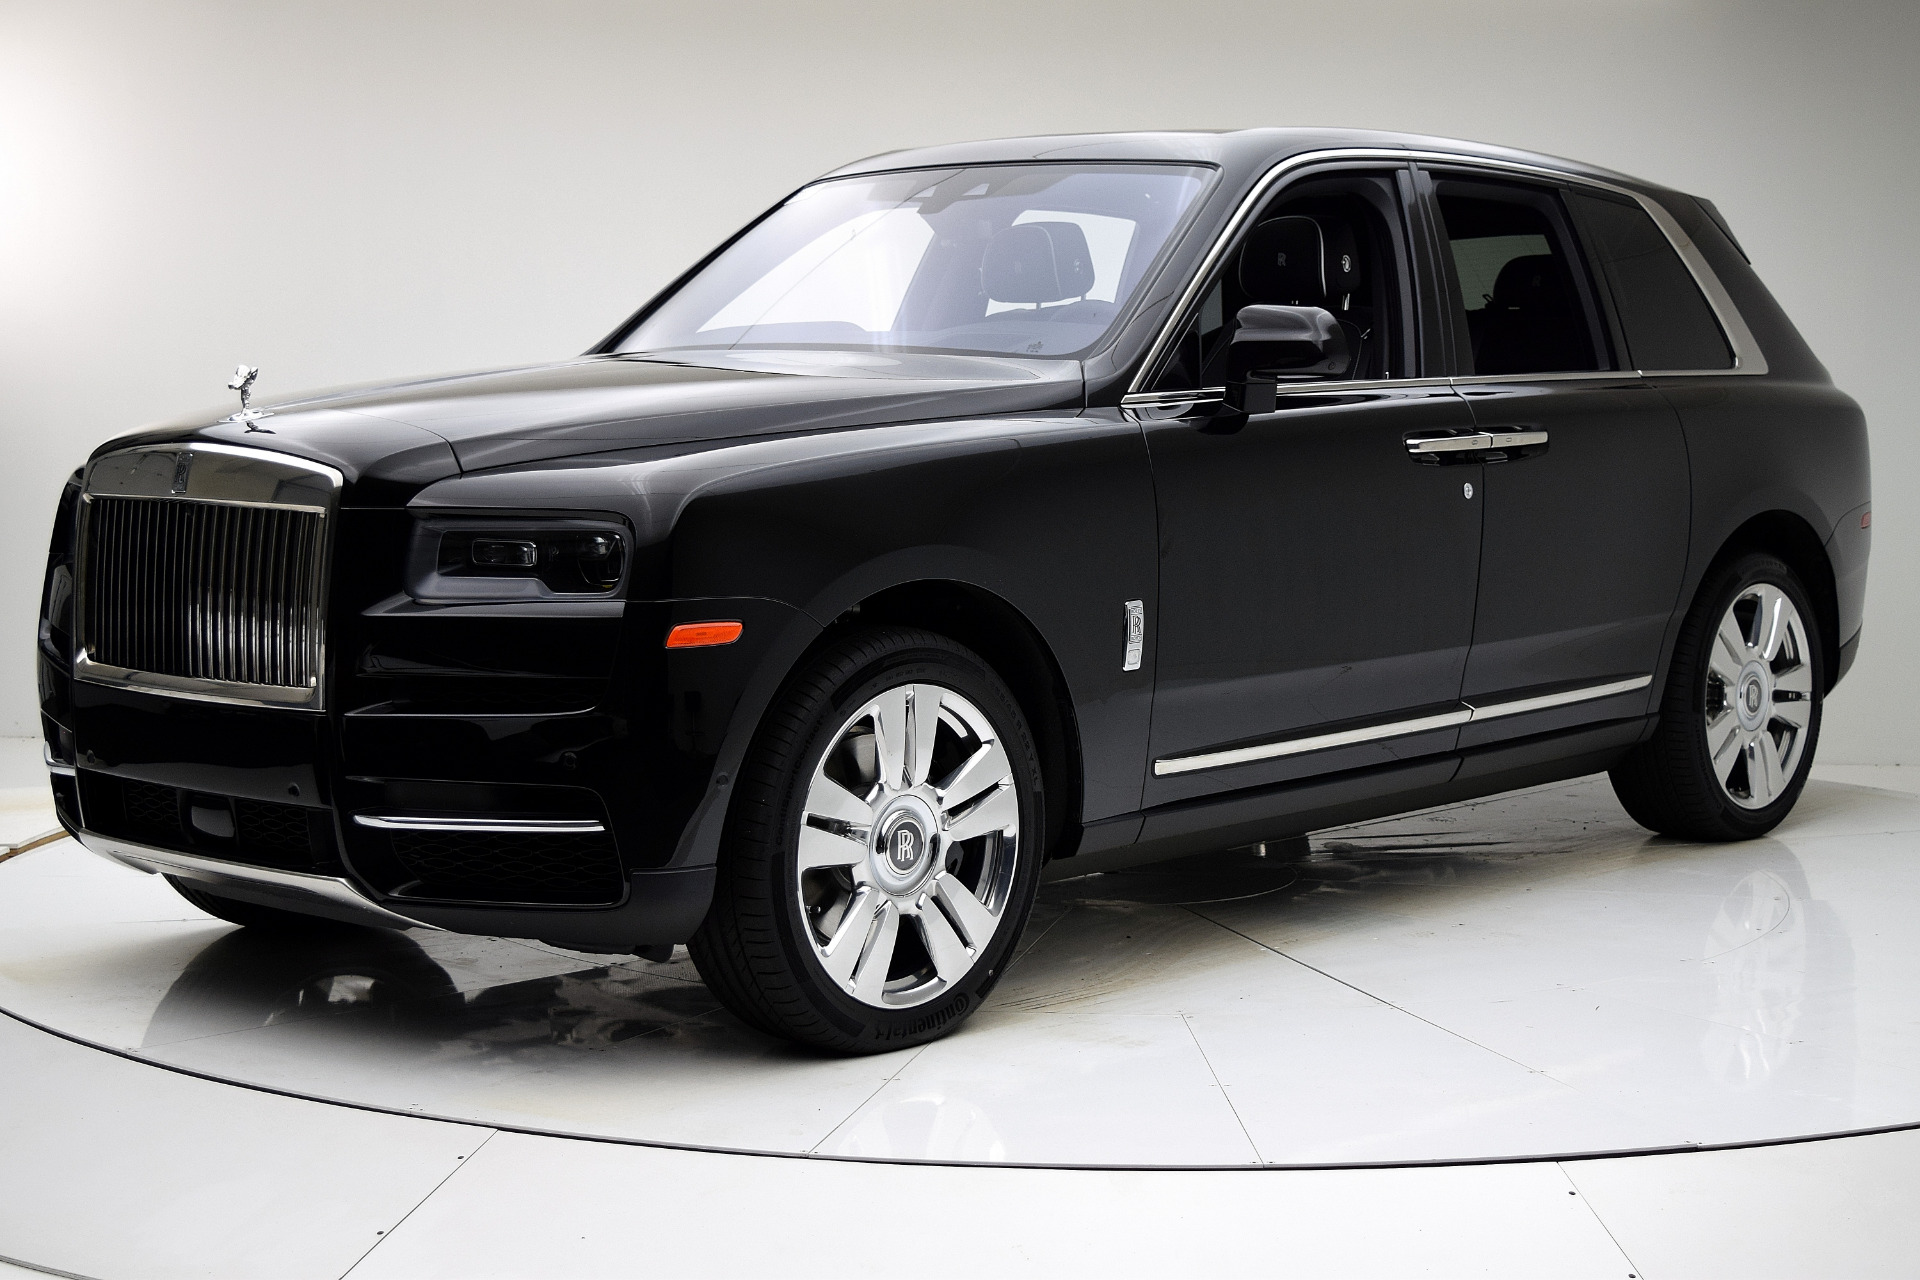 New 2020 Rolls-Royce Cullinan for sale Sold at F.C. Kerbeck Aston Martin in Palmyra NJ 08065 2